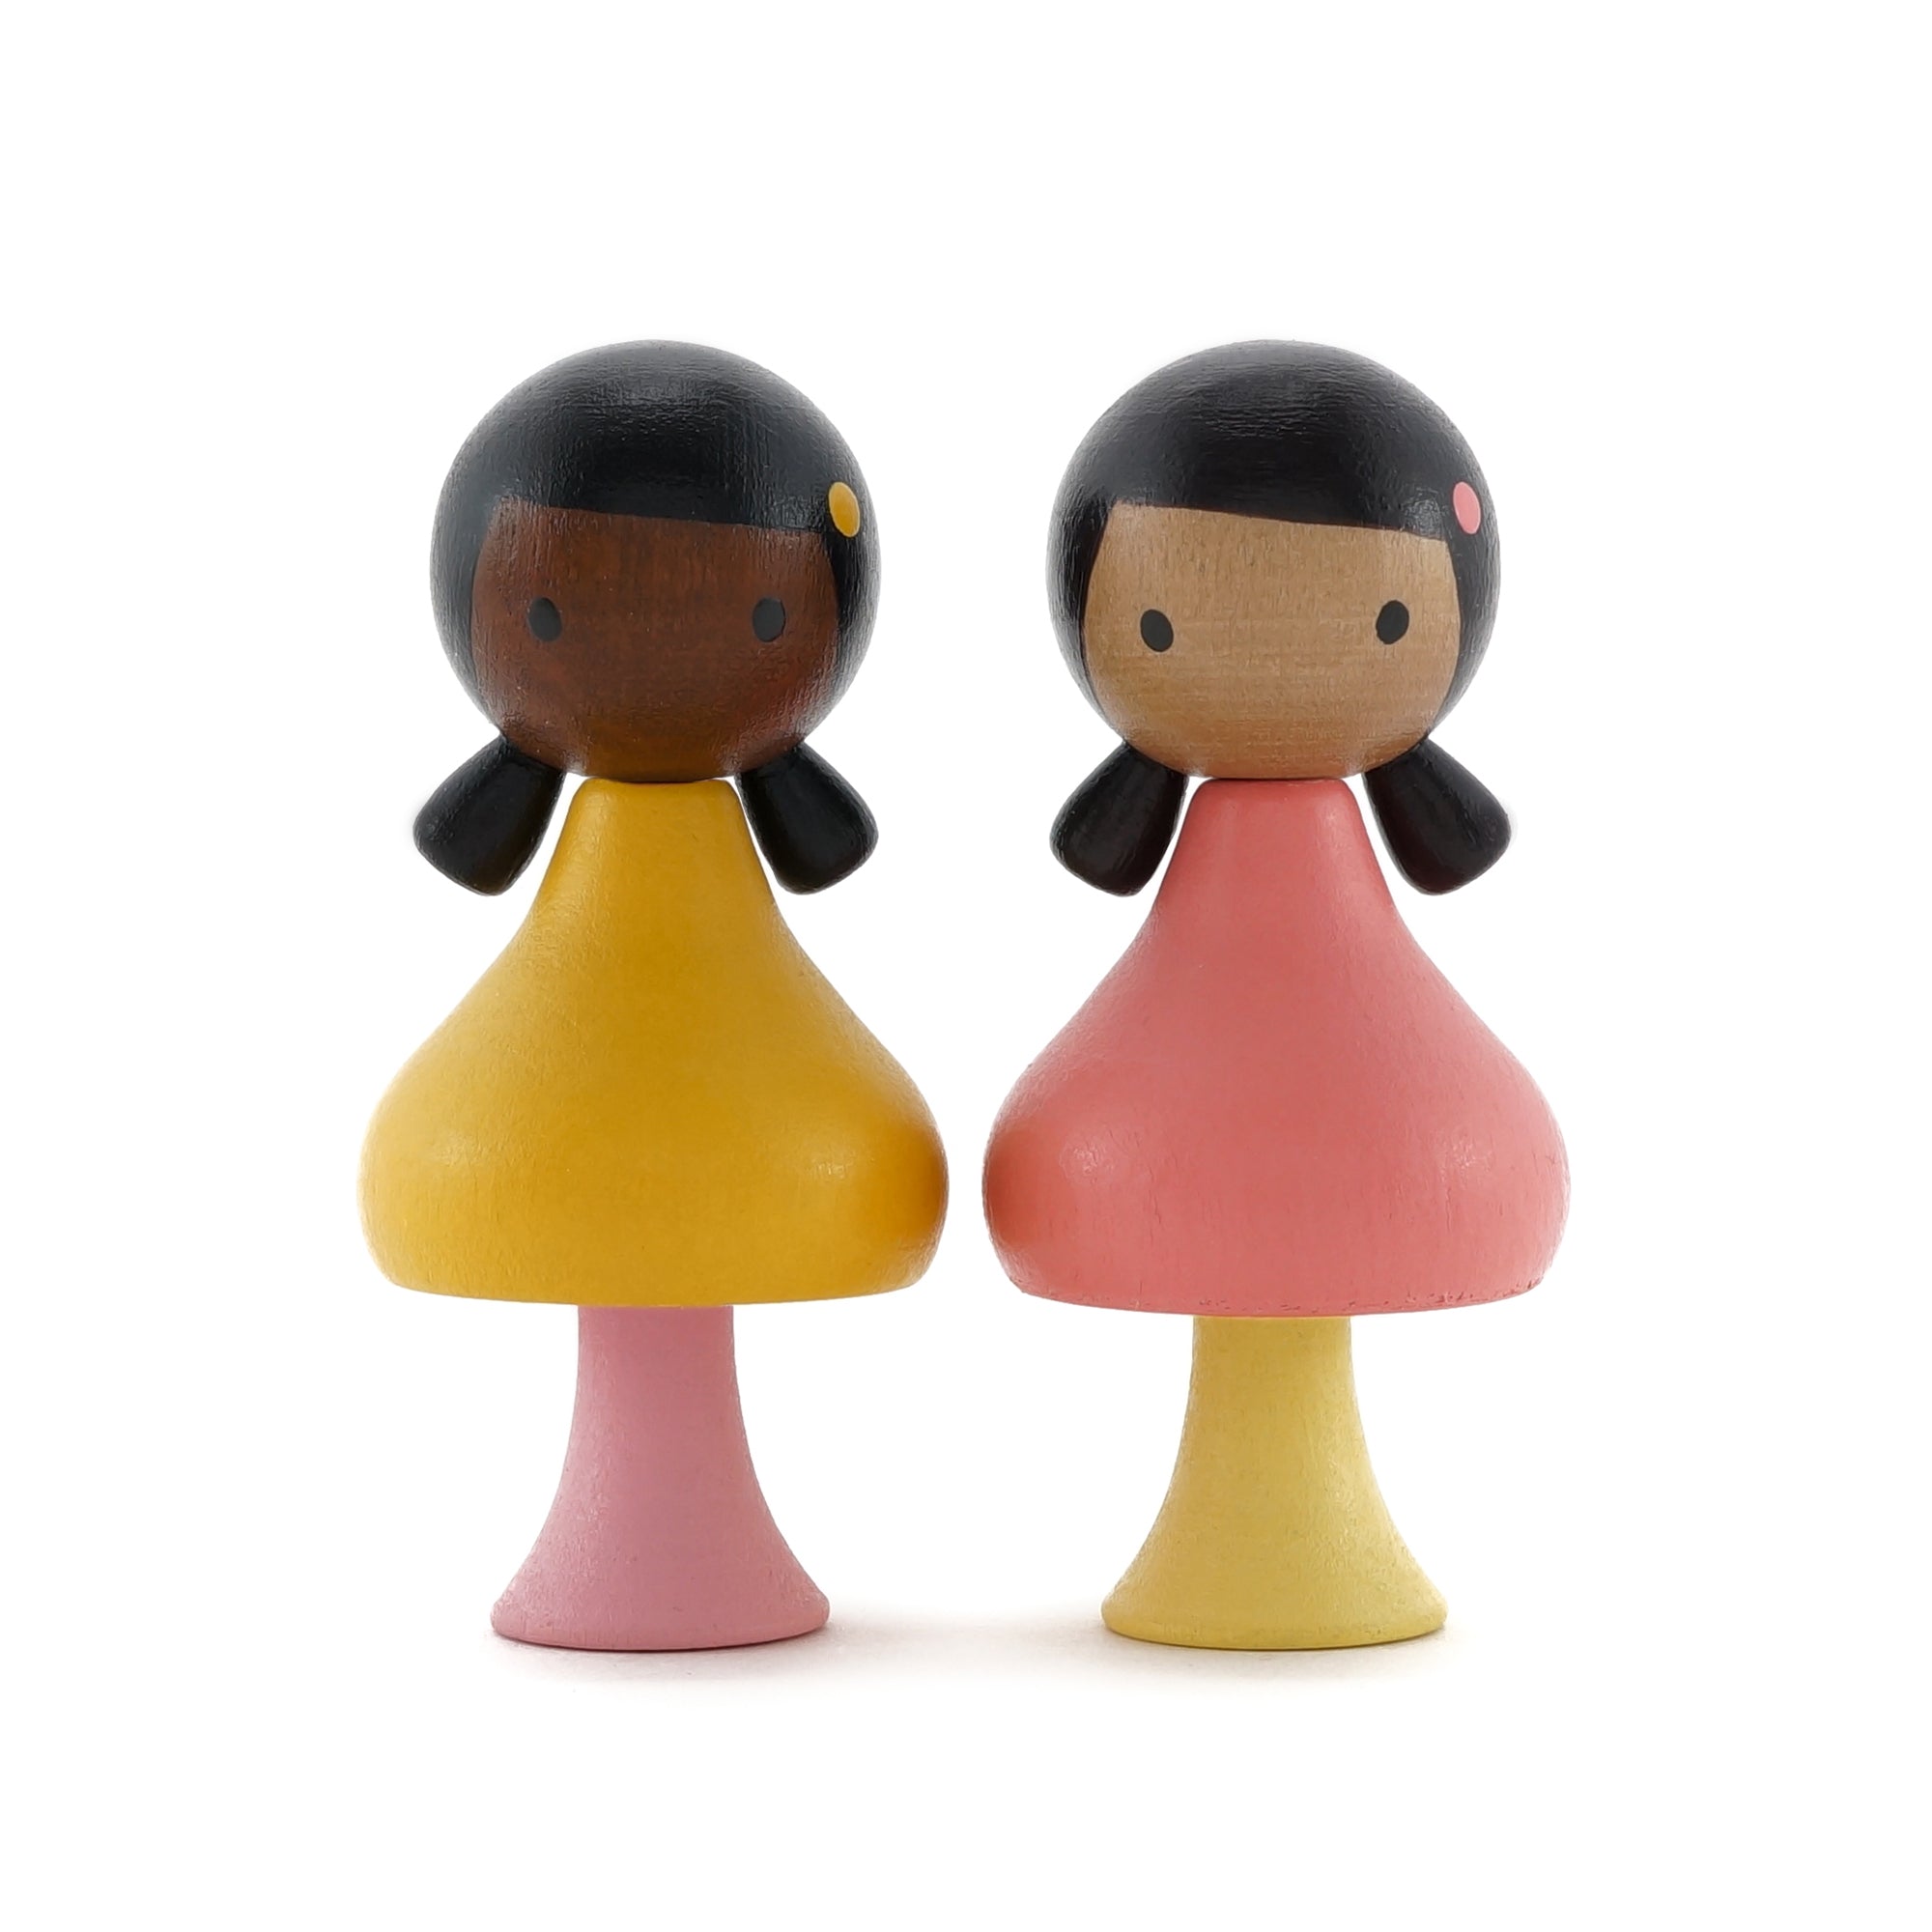 Clicques - houten magneetfiguurtjes - Ruby & Coco